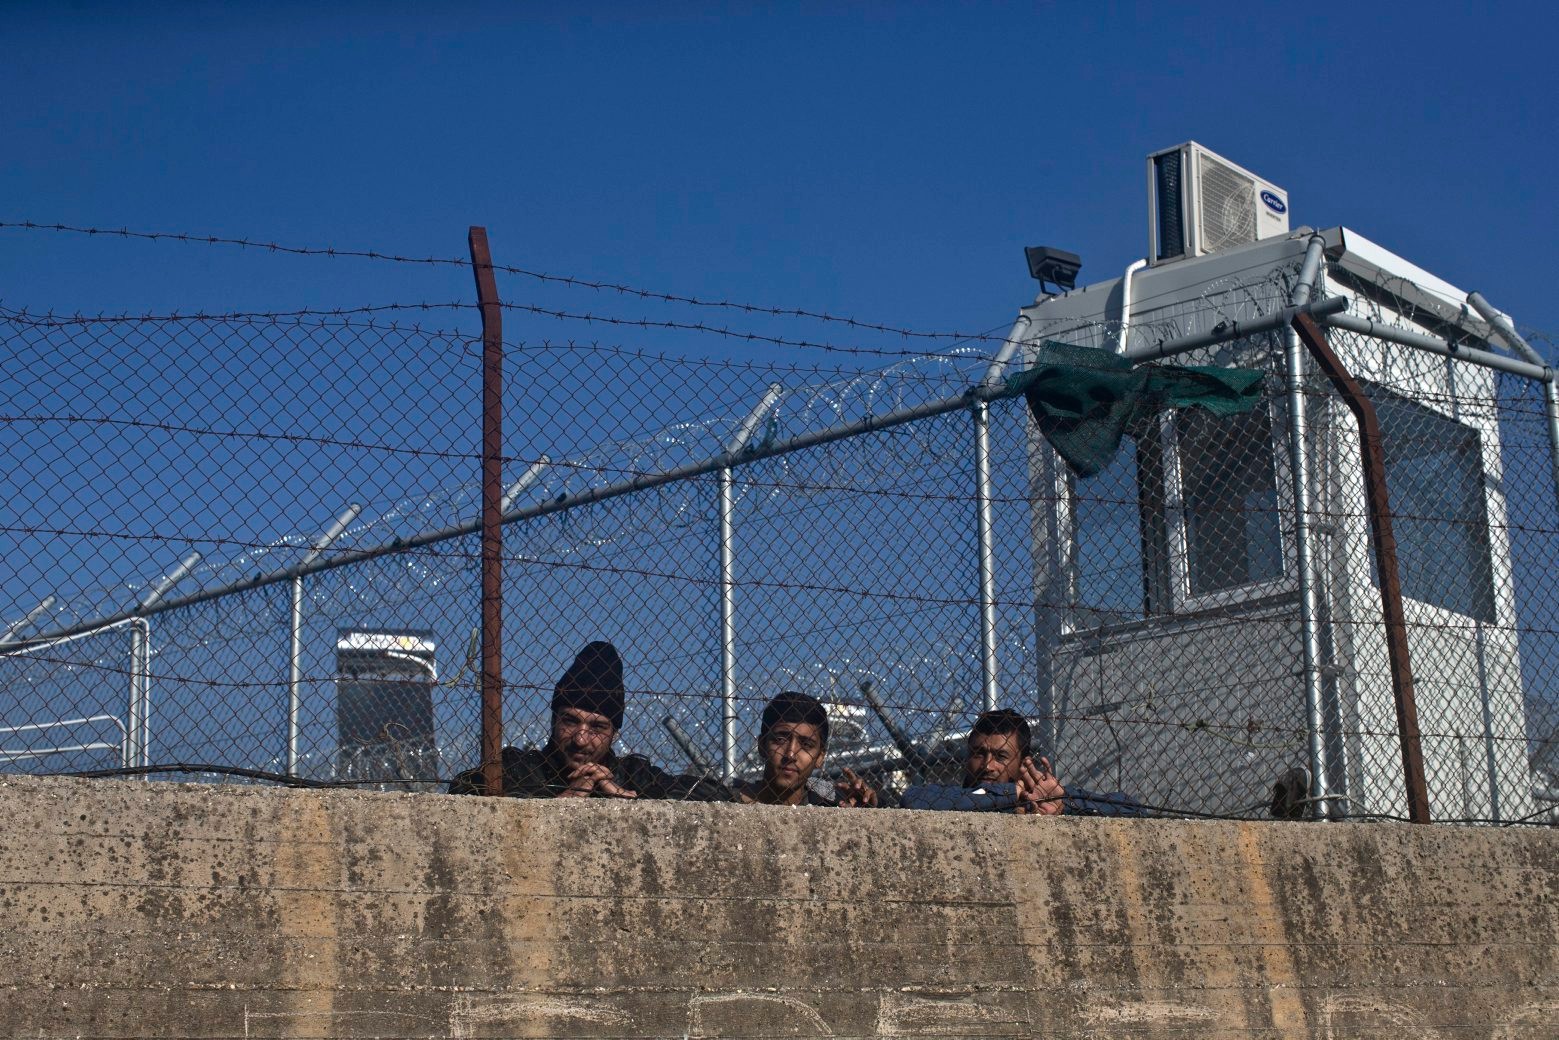 Three men stand by the fence of the migrant and refugee registration camp in Moria, on the island of Lesbos, Greece, Thursday, Nov. 5, 2015. The European Union predict that around 3 million more migrants are expected to arrive in the 28-nation bloc by the end of next year. (AP Photo/Marko Drobnjakovic) Greece Migrants